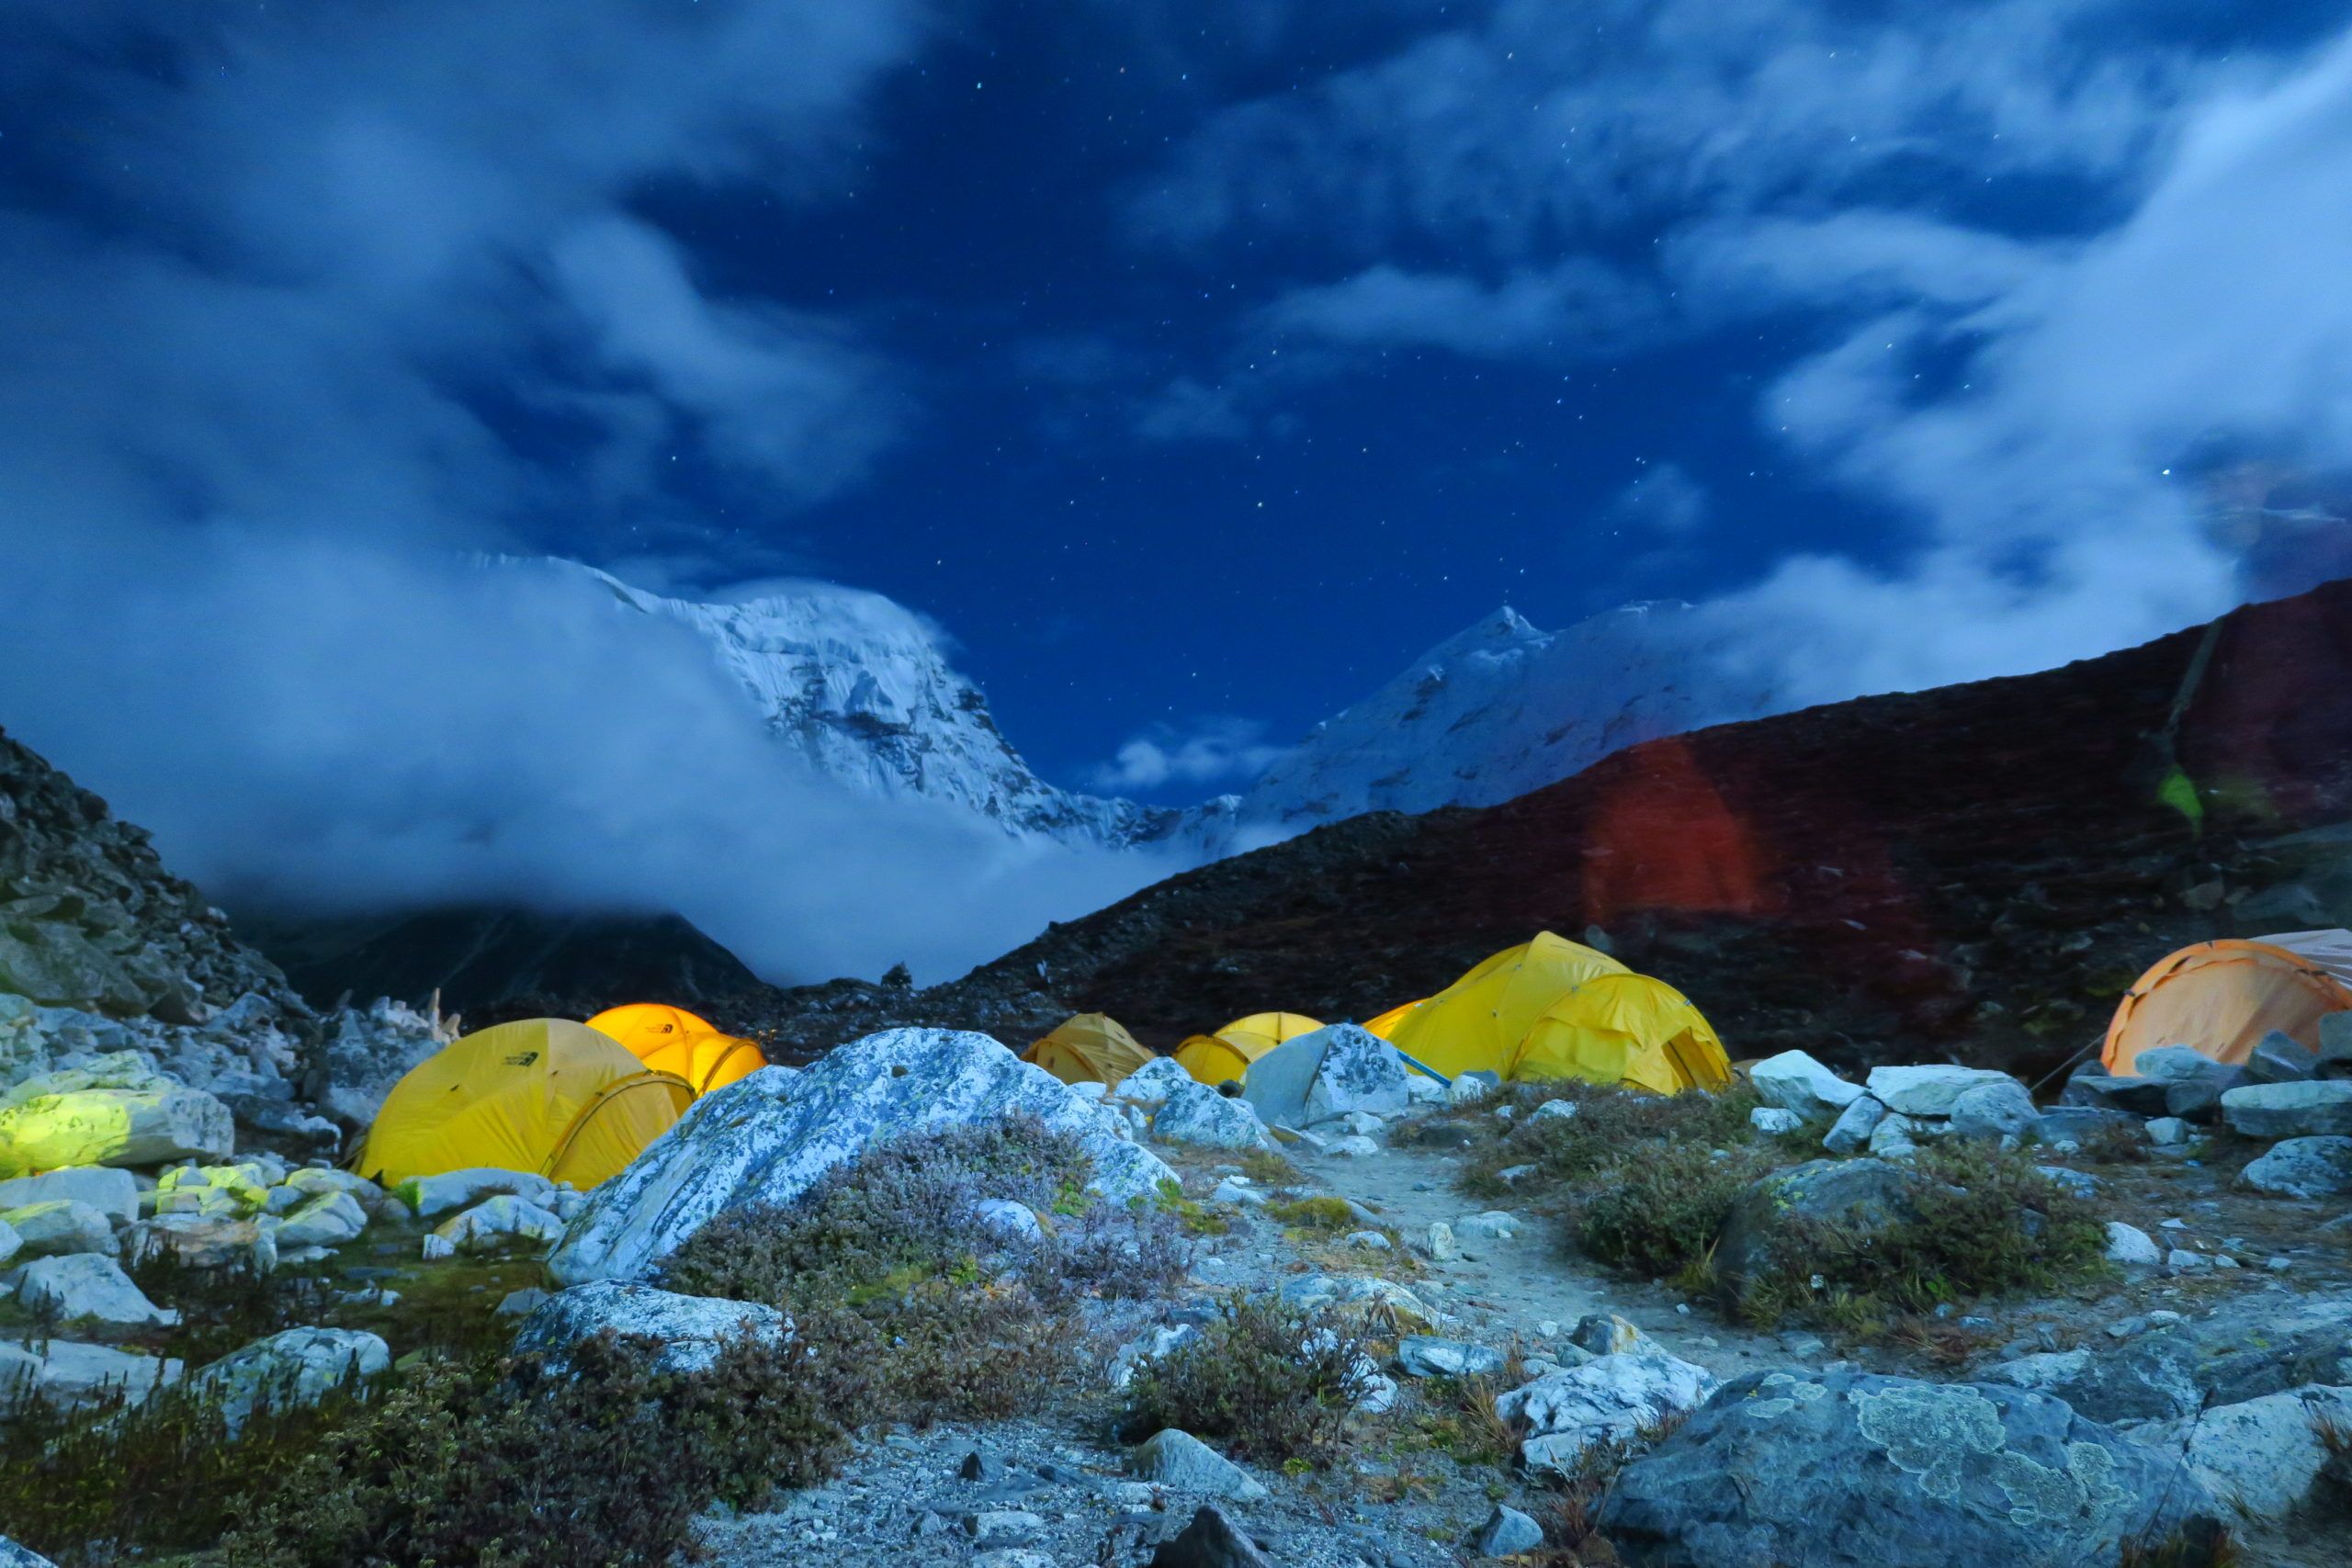 Lessons Learned from a Mountaineering Expedition in the Himalayas